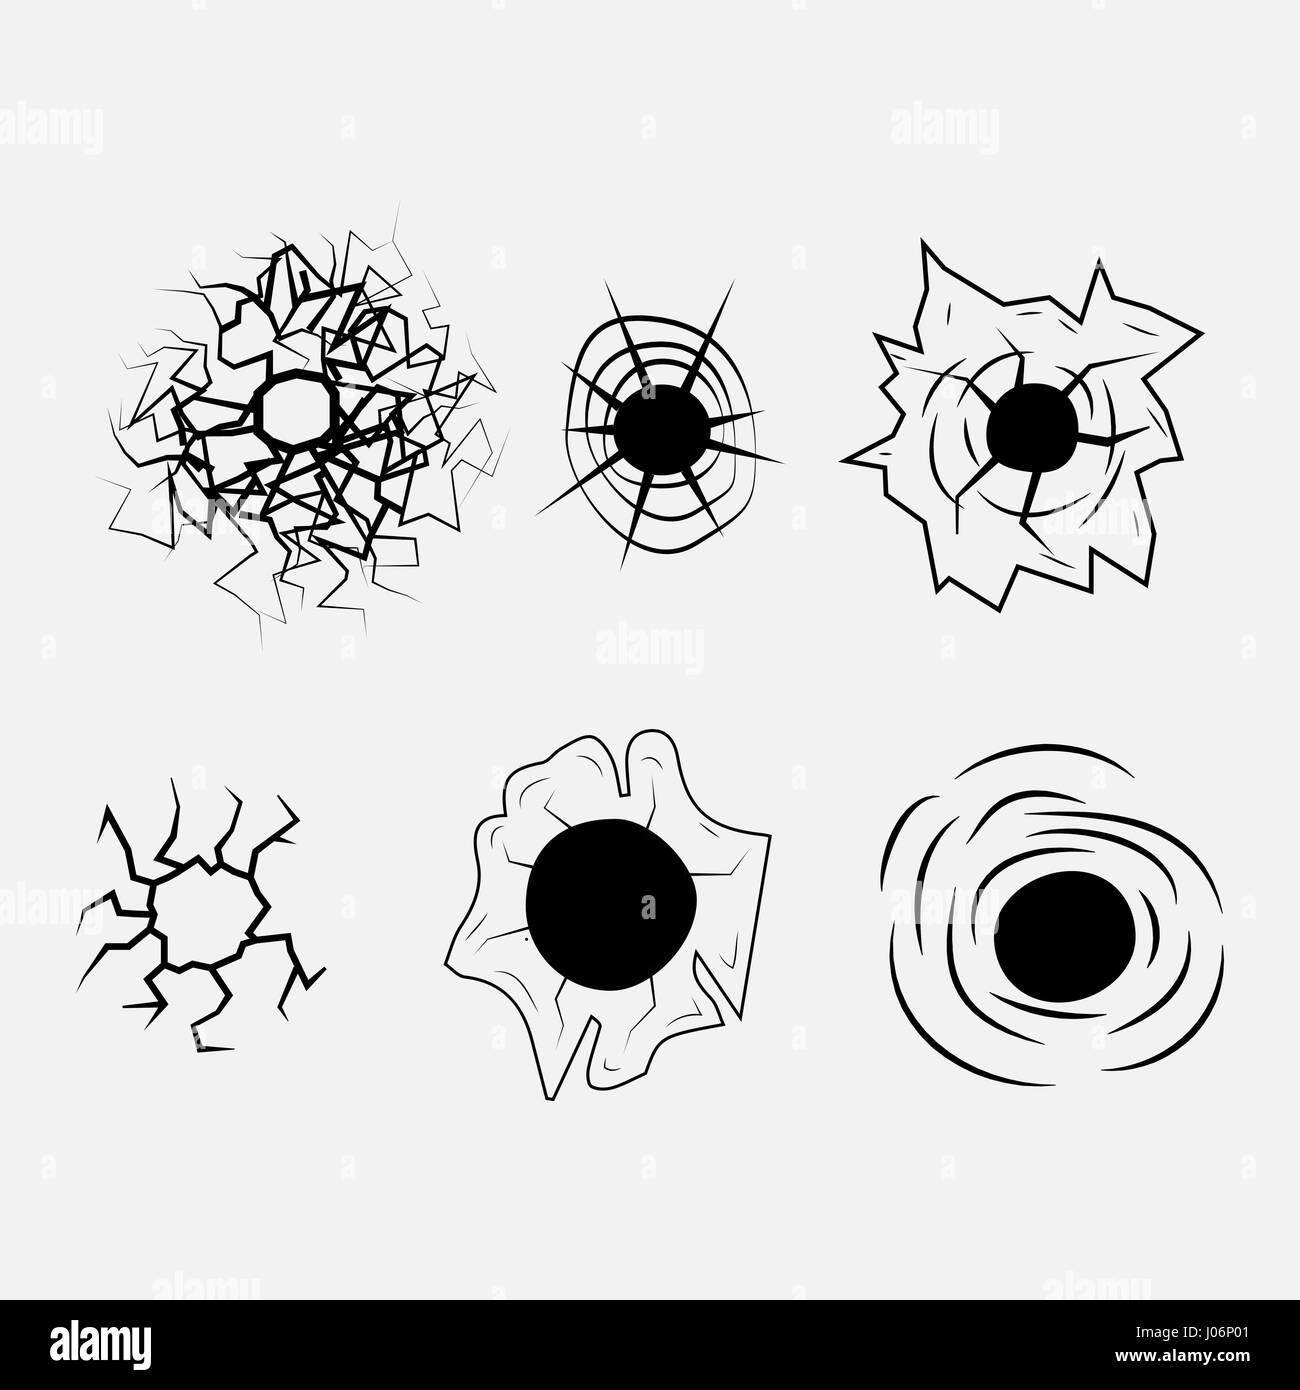 Bullet hole vector Black and White Stock Photos & Images - Alamy